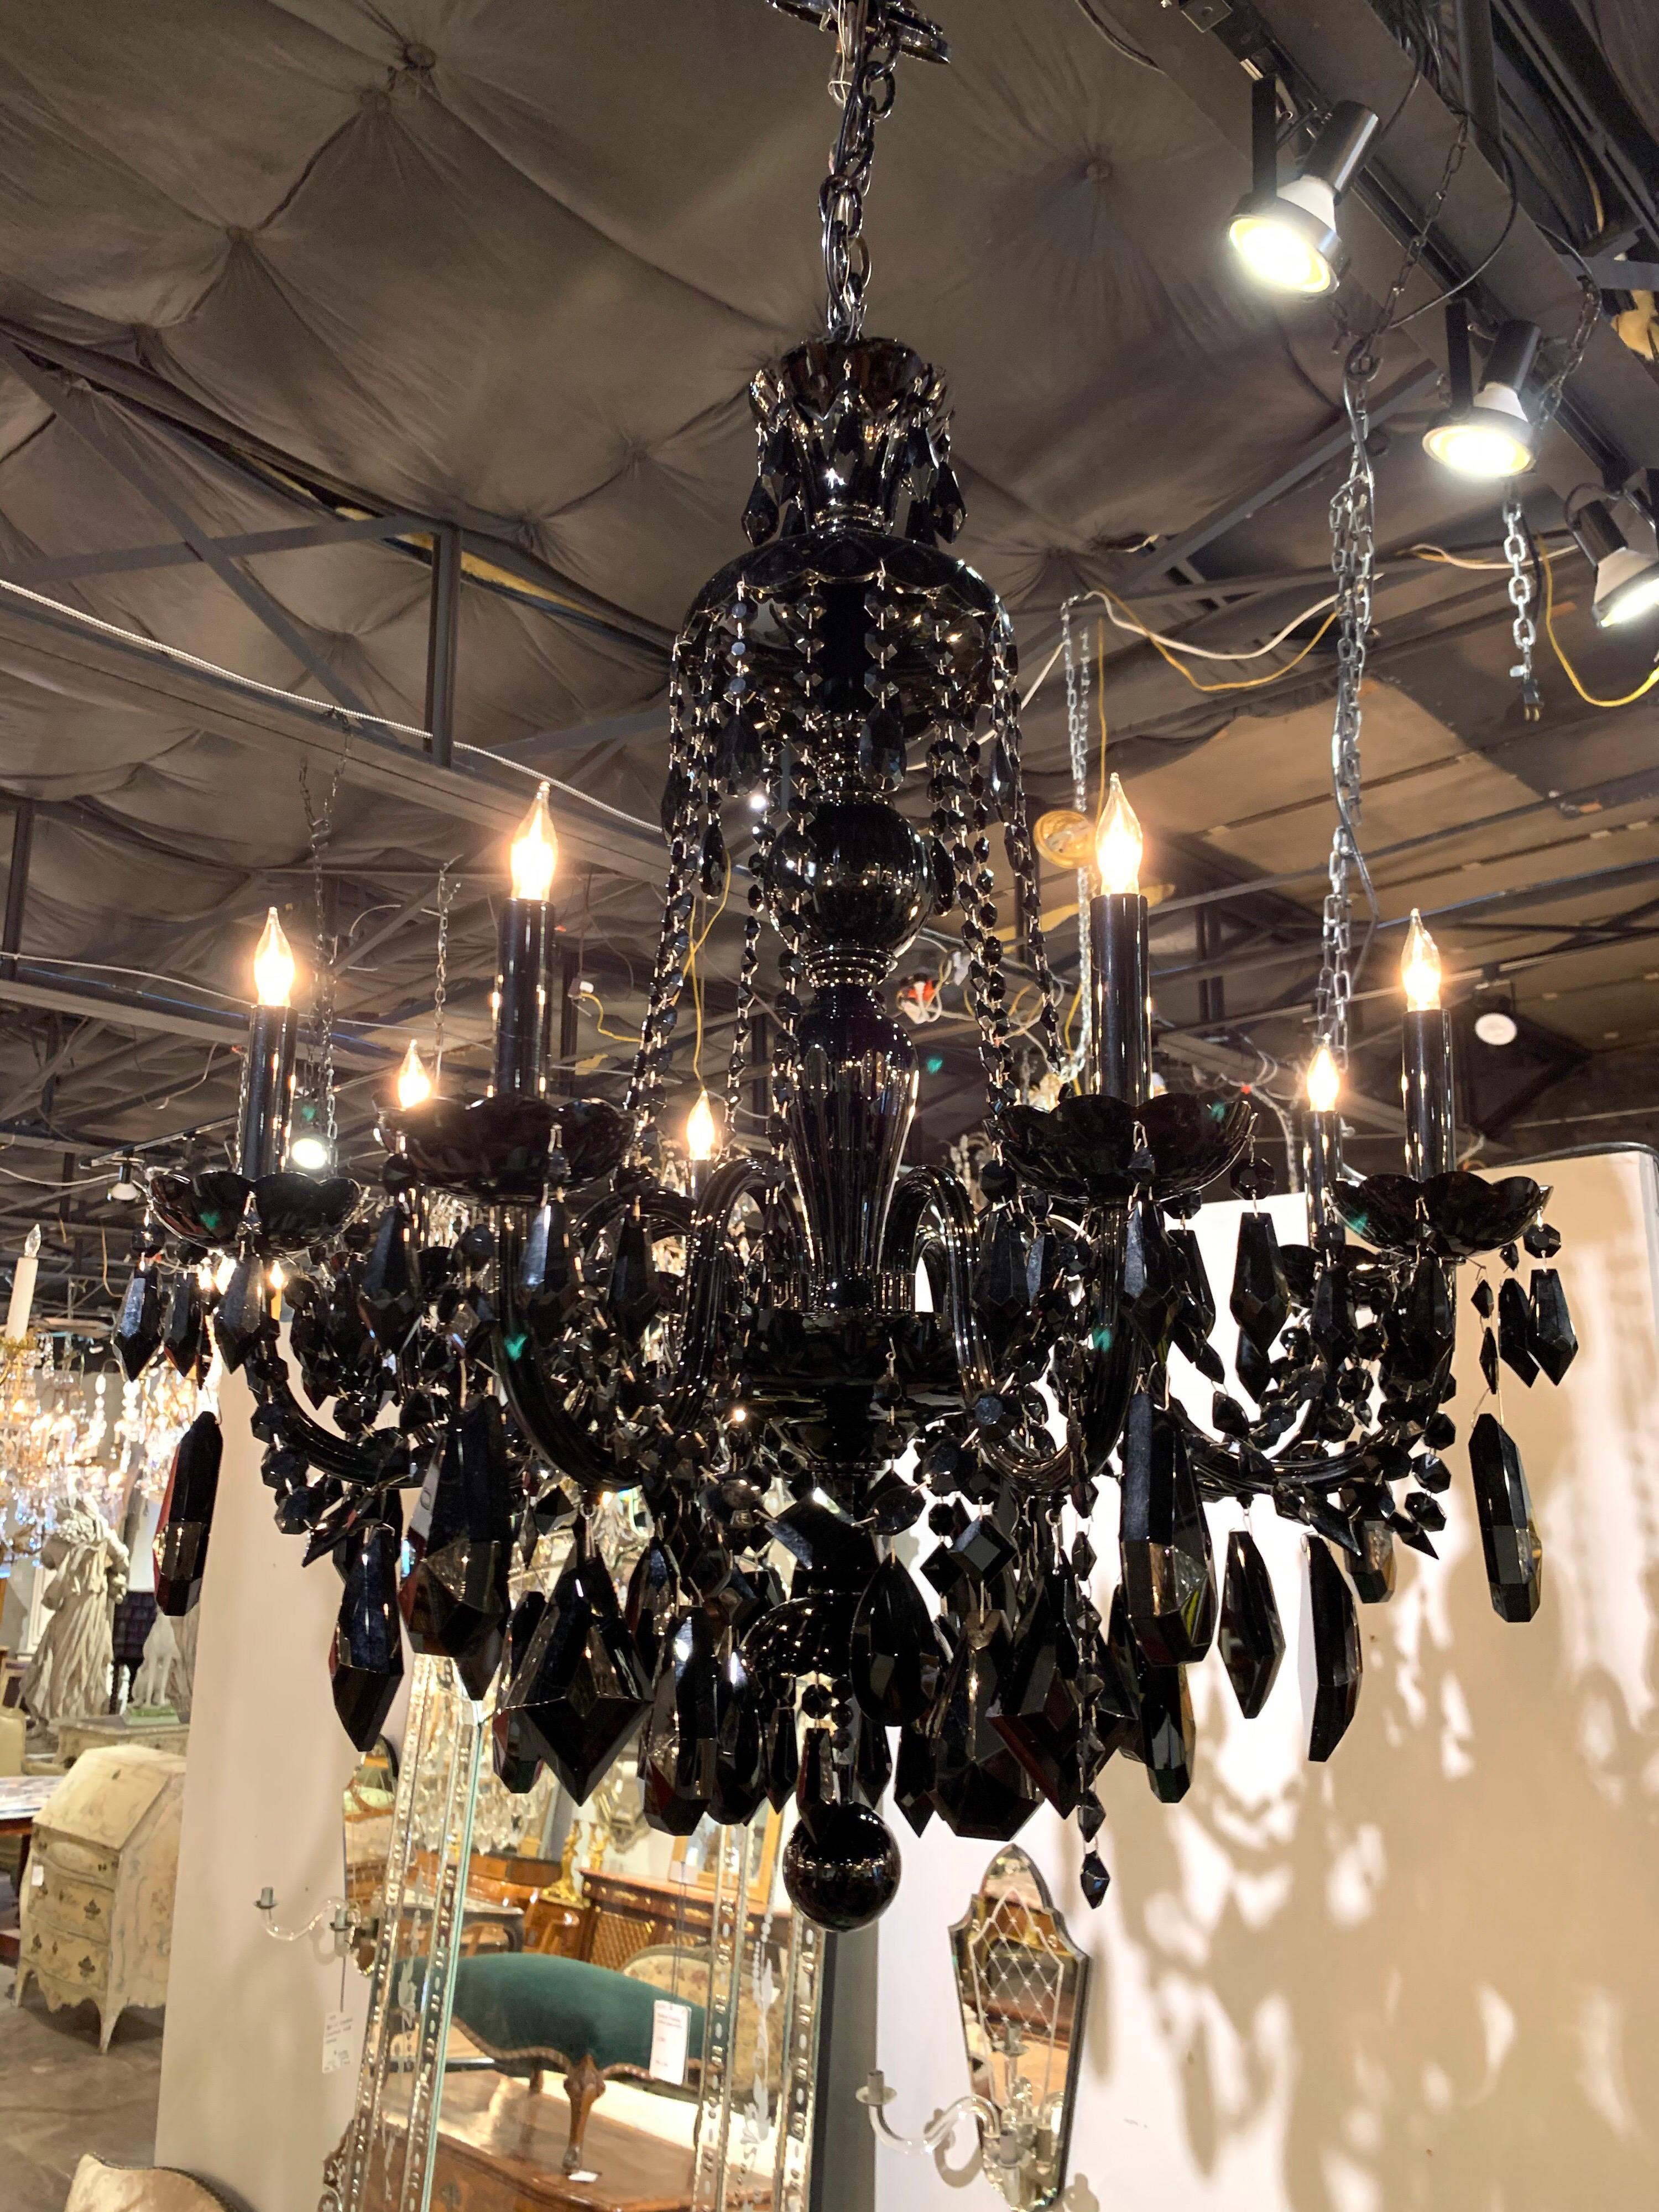 Very striking modern pair of black crystal chandeliers with 8-light. Large array of glistening beads and crystals. This unique pair would be wonderful for an upscale design!